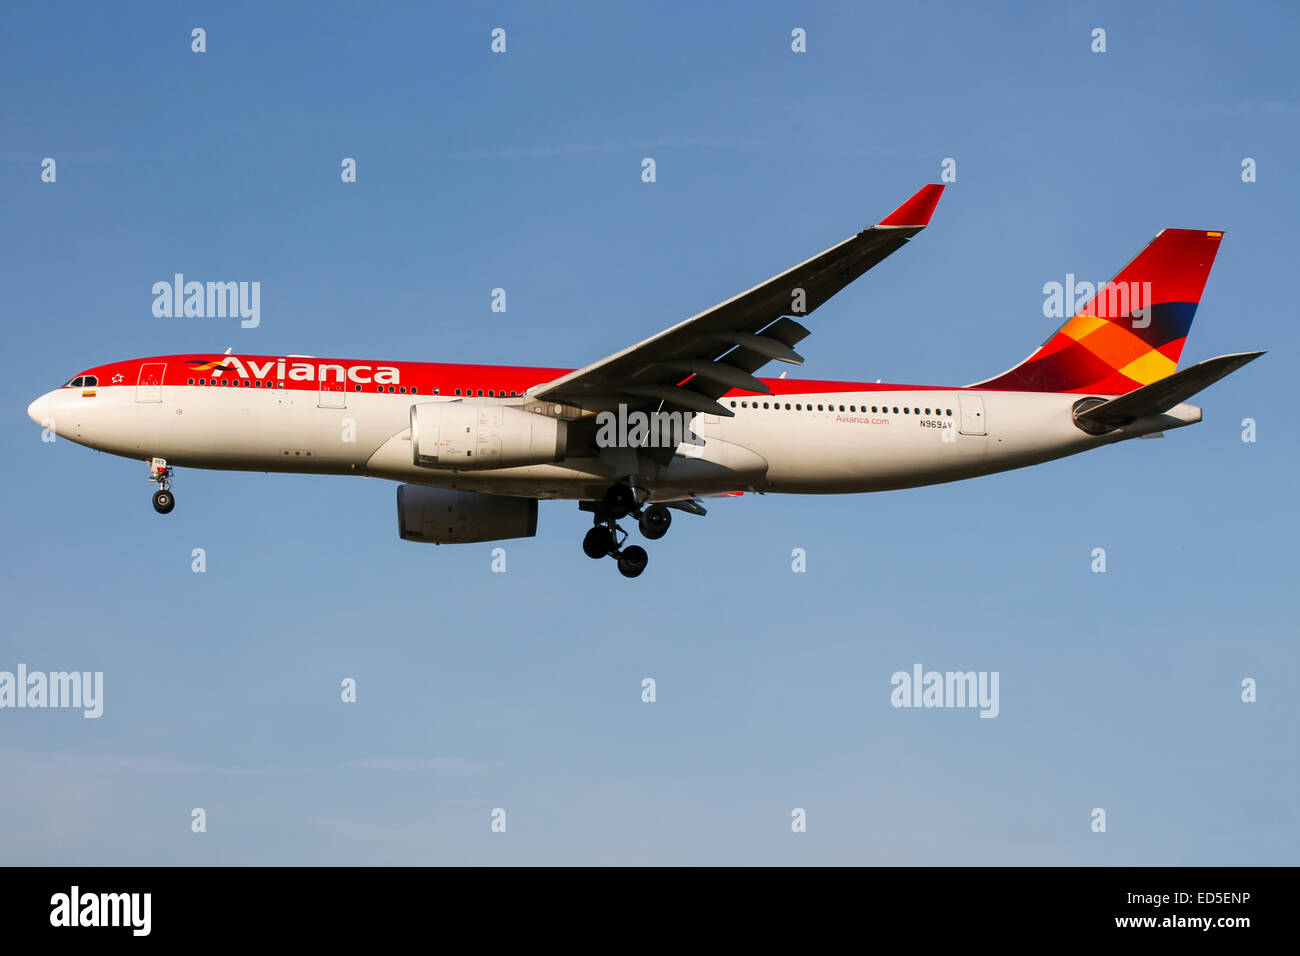 Avianca Airbus A330-200 approaches runway 27L at London Heathrow airport. Stock Photo